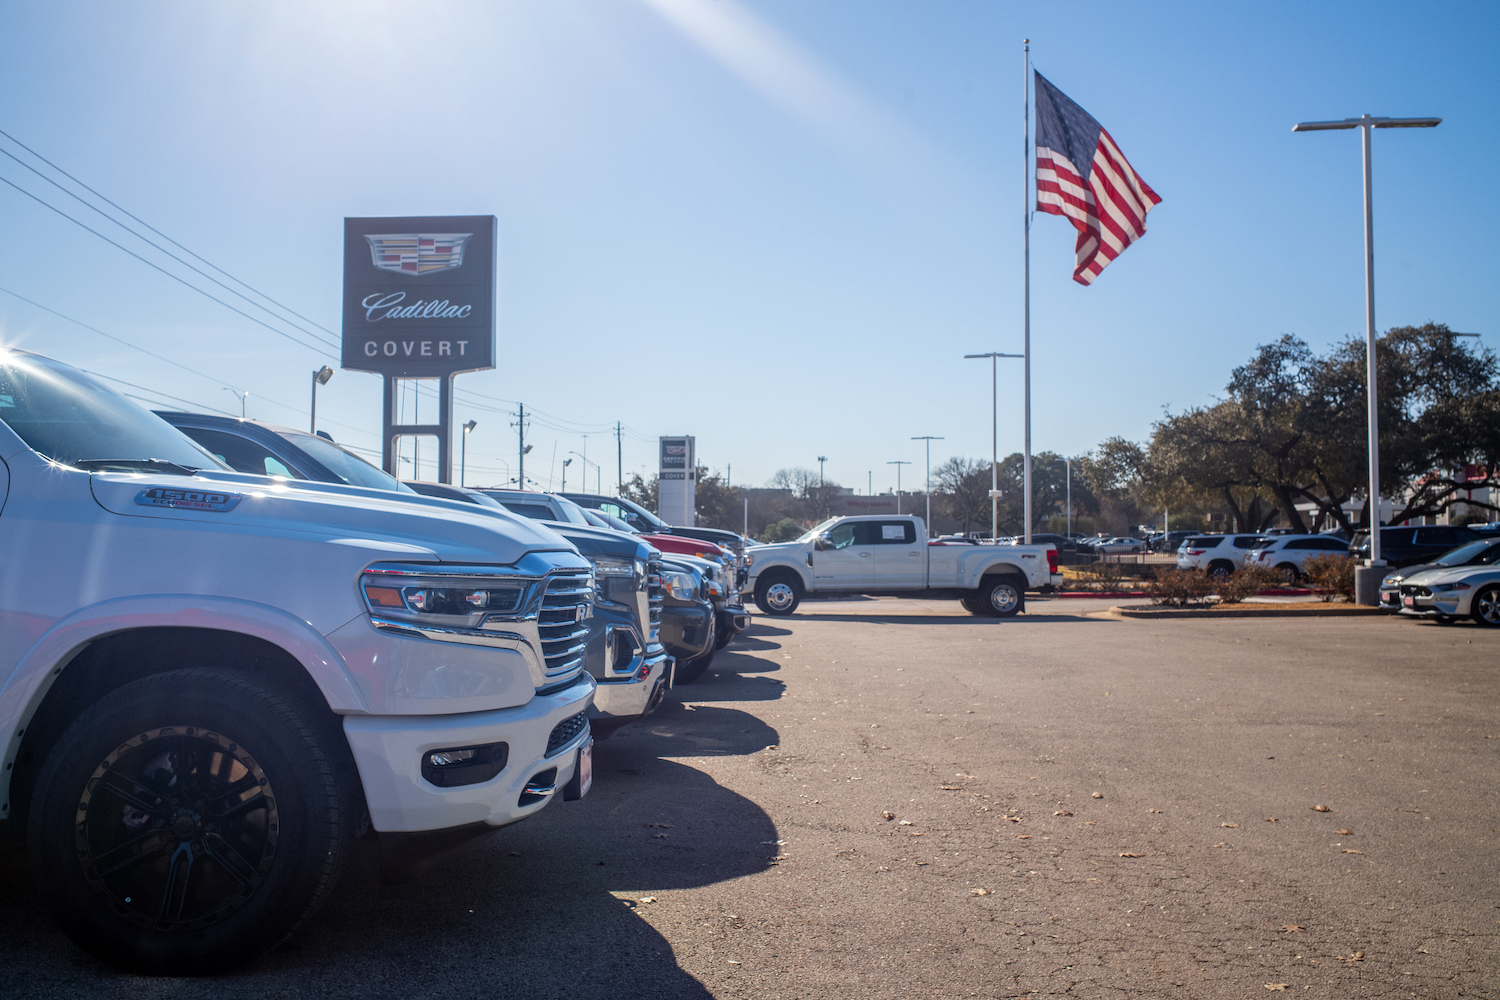 A row of different pickup trucks parked at a store, with the American flag in the background.